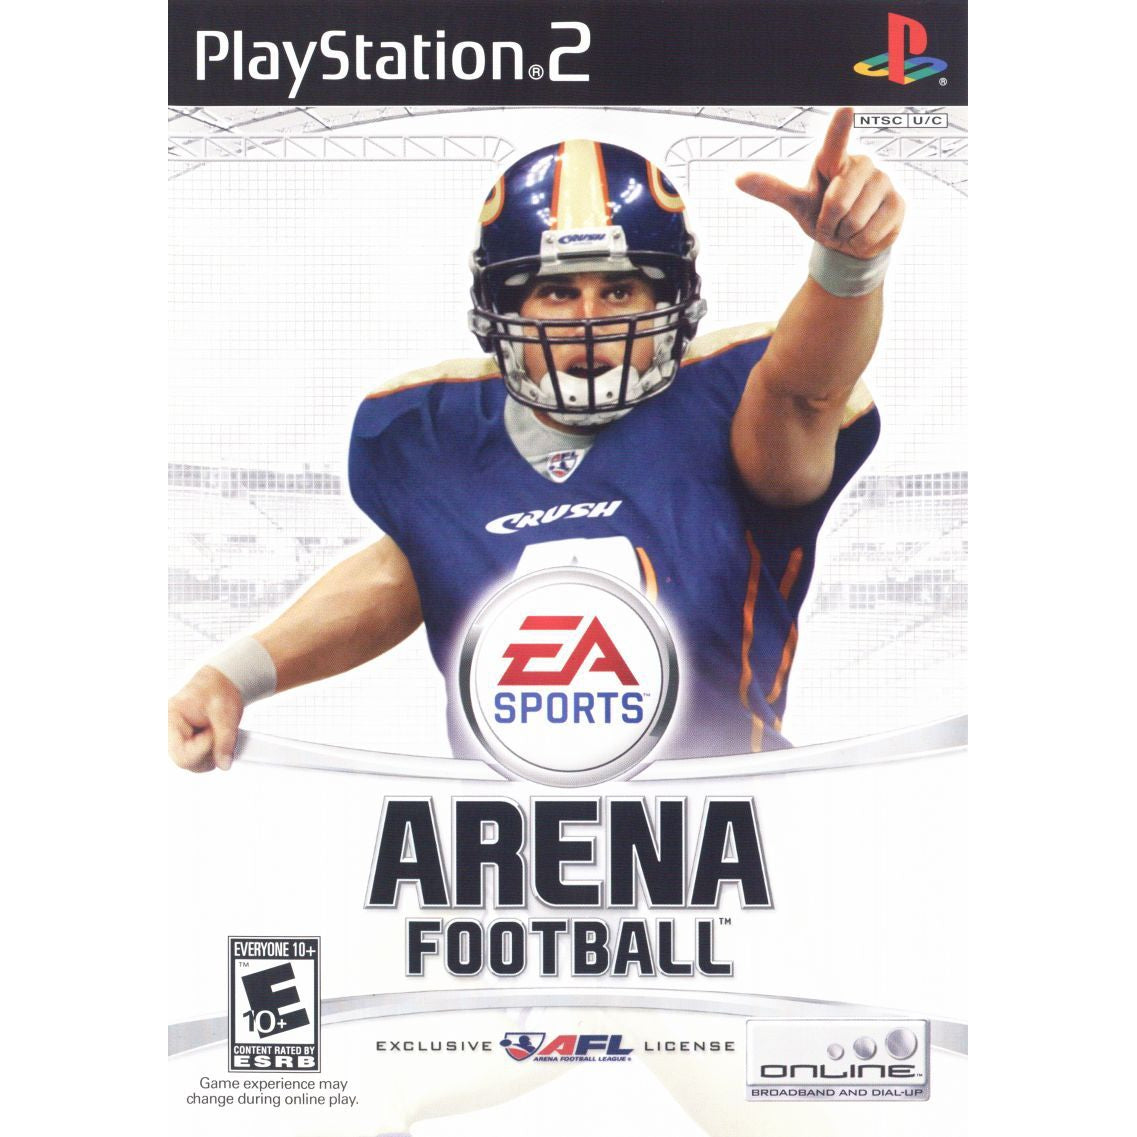 Arena Football - PlayStation 2 (PS2) Game Complete - YourGamingShop.com - Buy, Sell, Trade Video Games Online. 120 Day Warranty. Satisfaction Guaranteed.